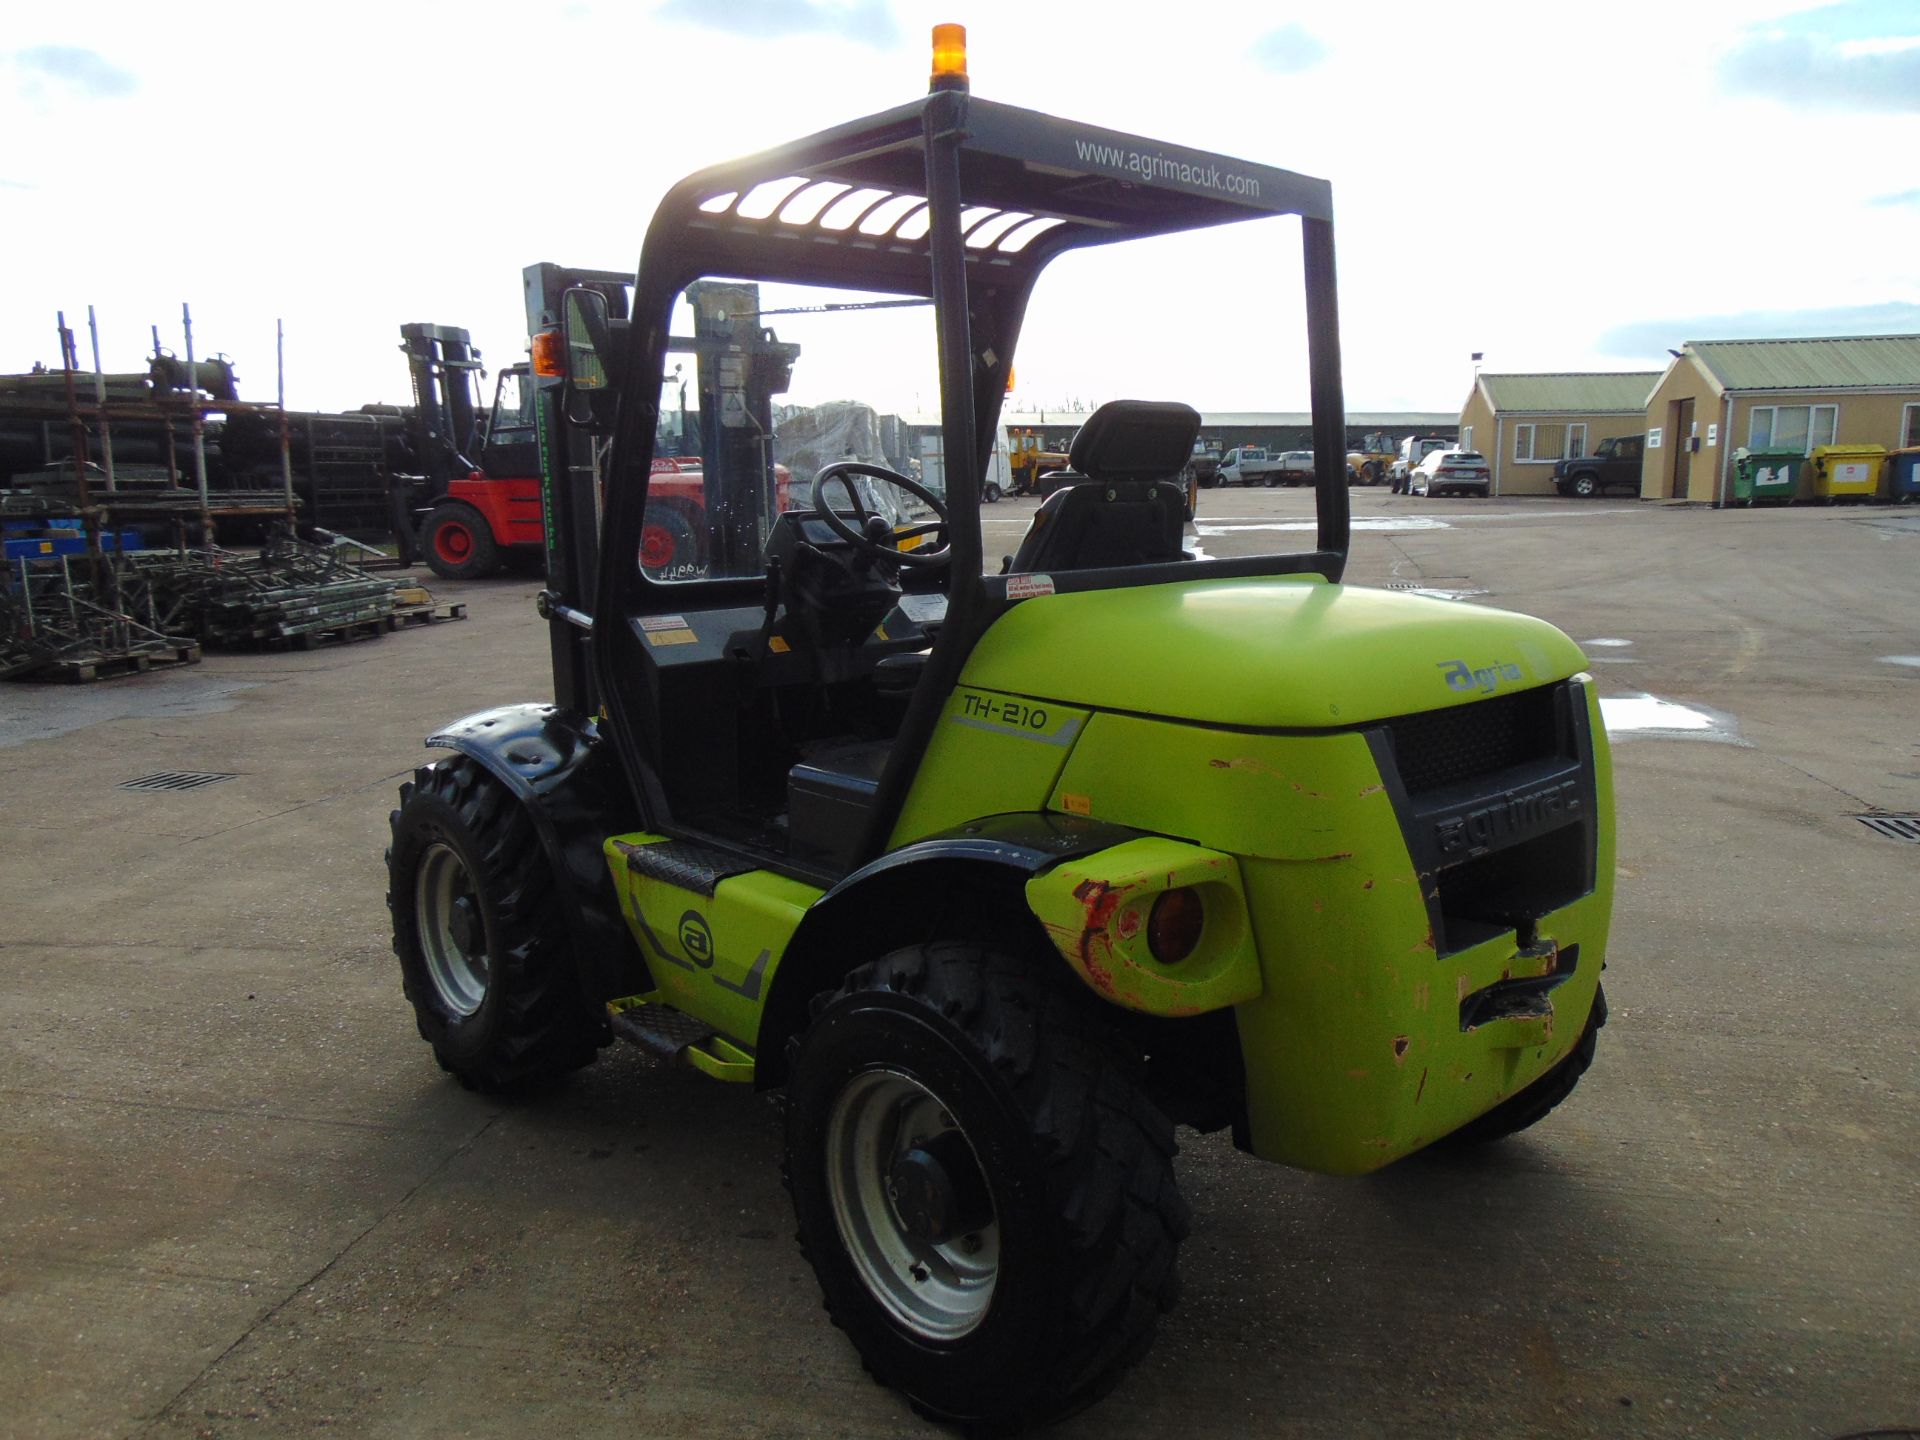 2011 Agrimac Agria TH210 4x4 Rough Terrain Diesel Forklift ONLY 1,918 HOURS!!! - Image 9 of 30